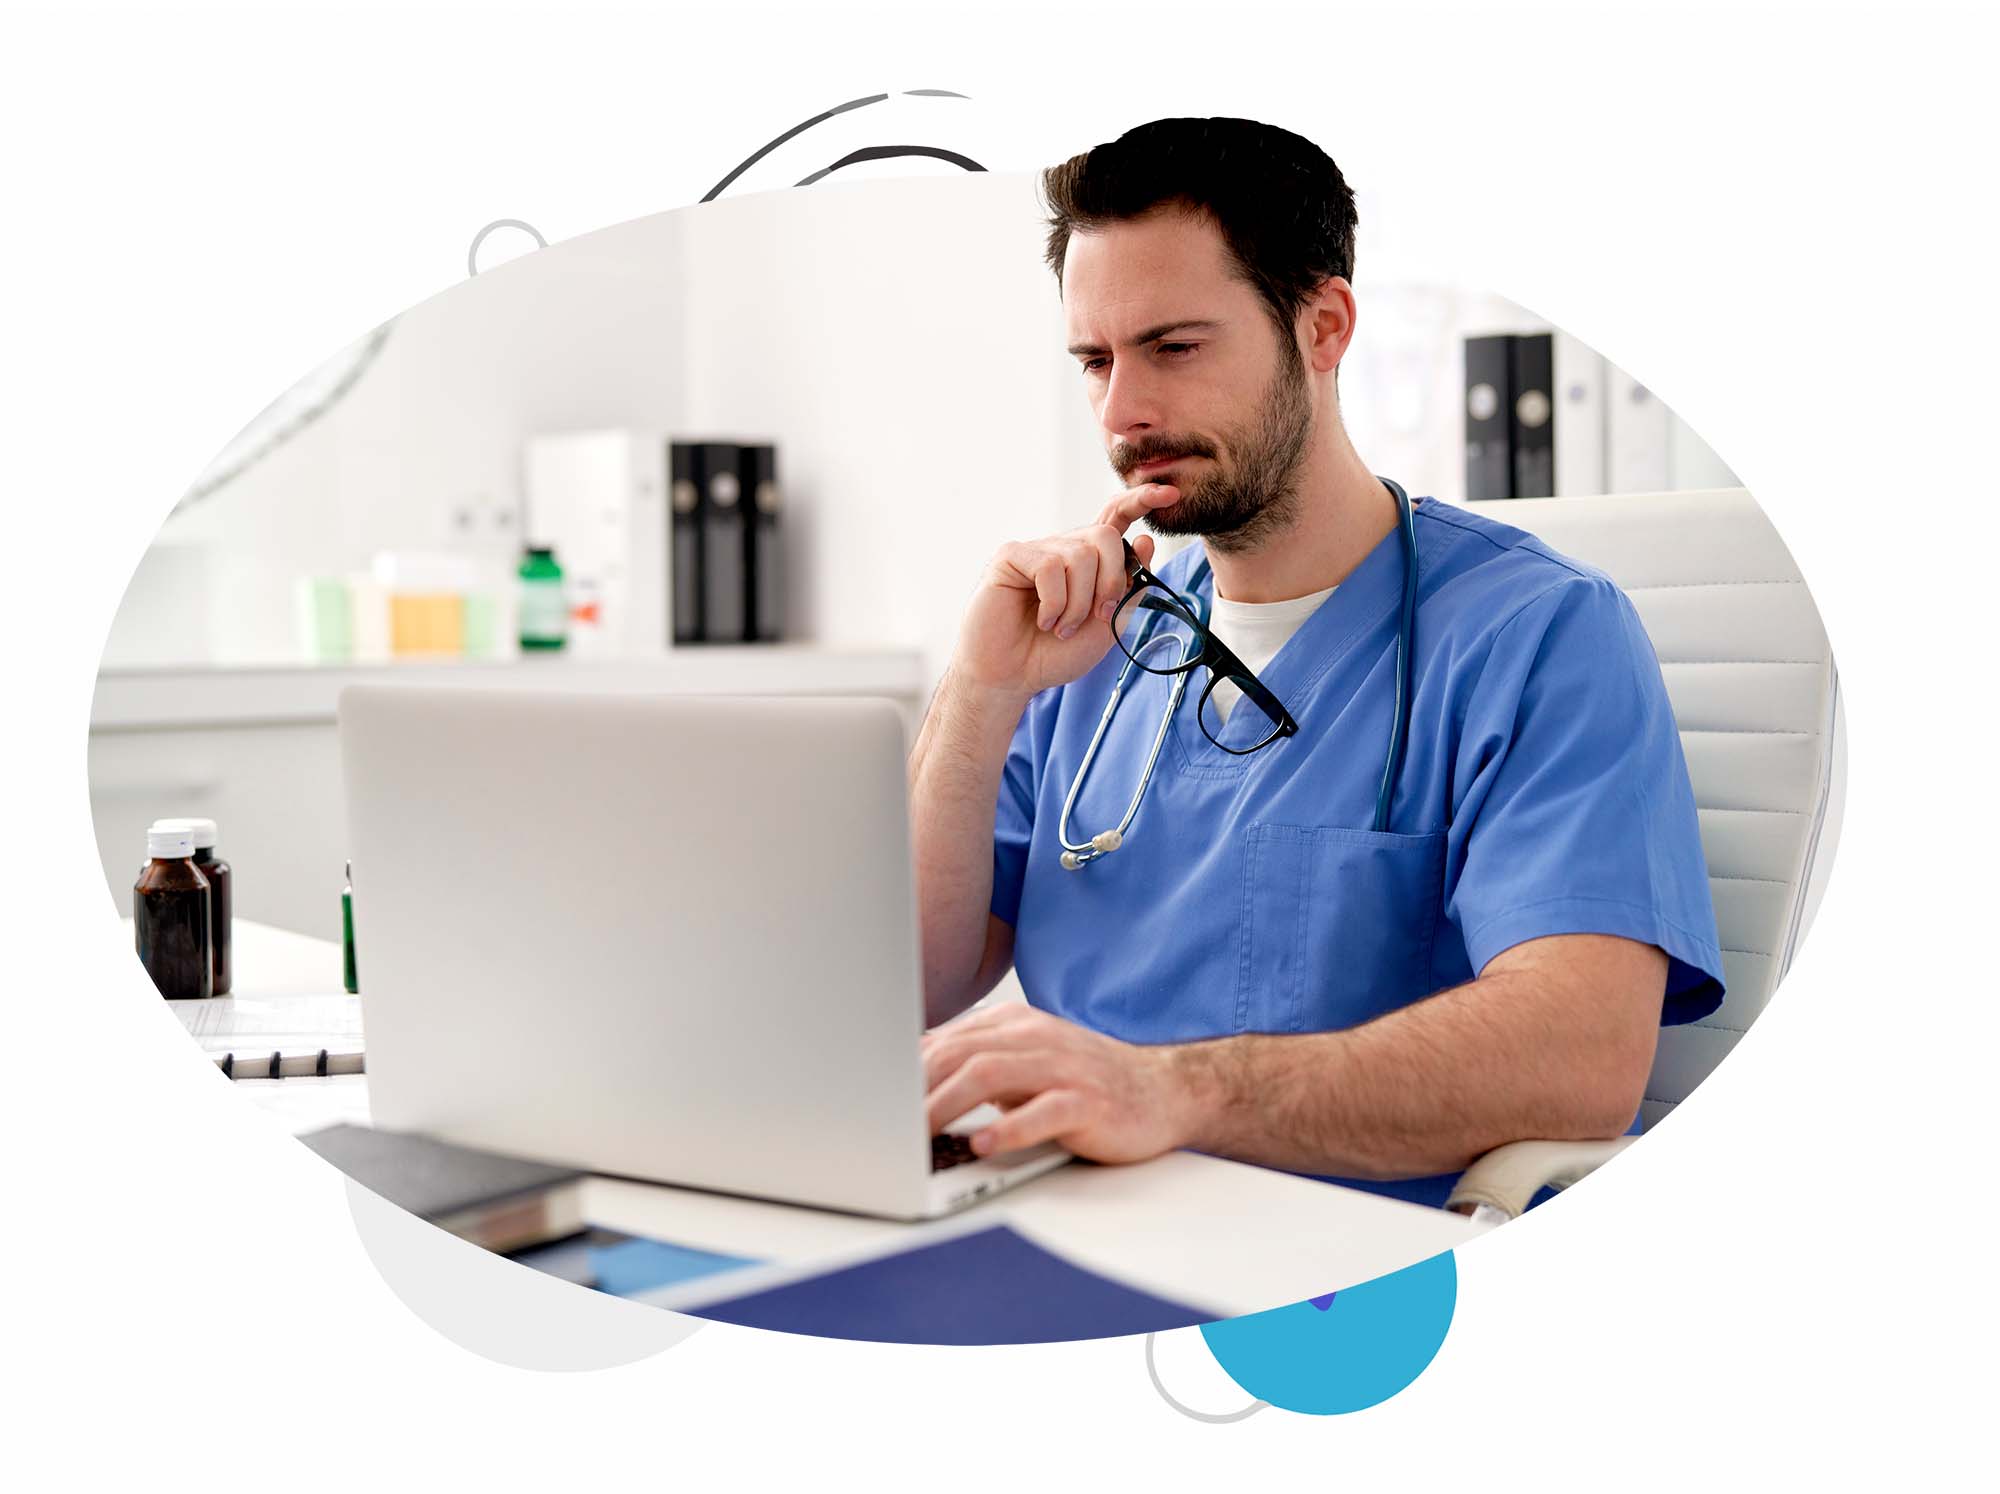 Concentrated male doctor using laptop searching for MRP products 